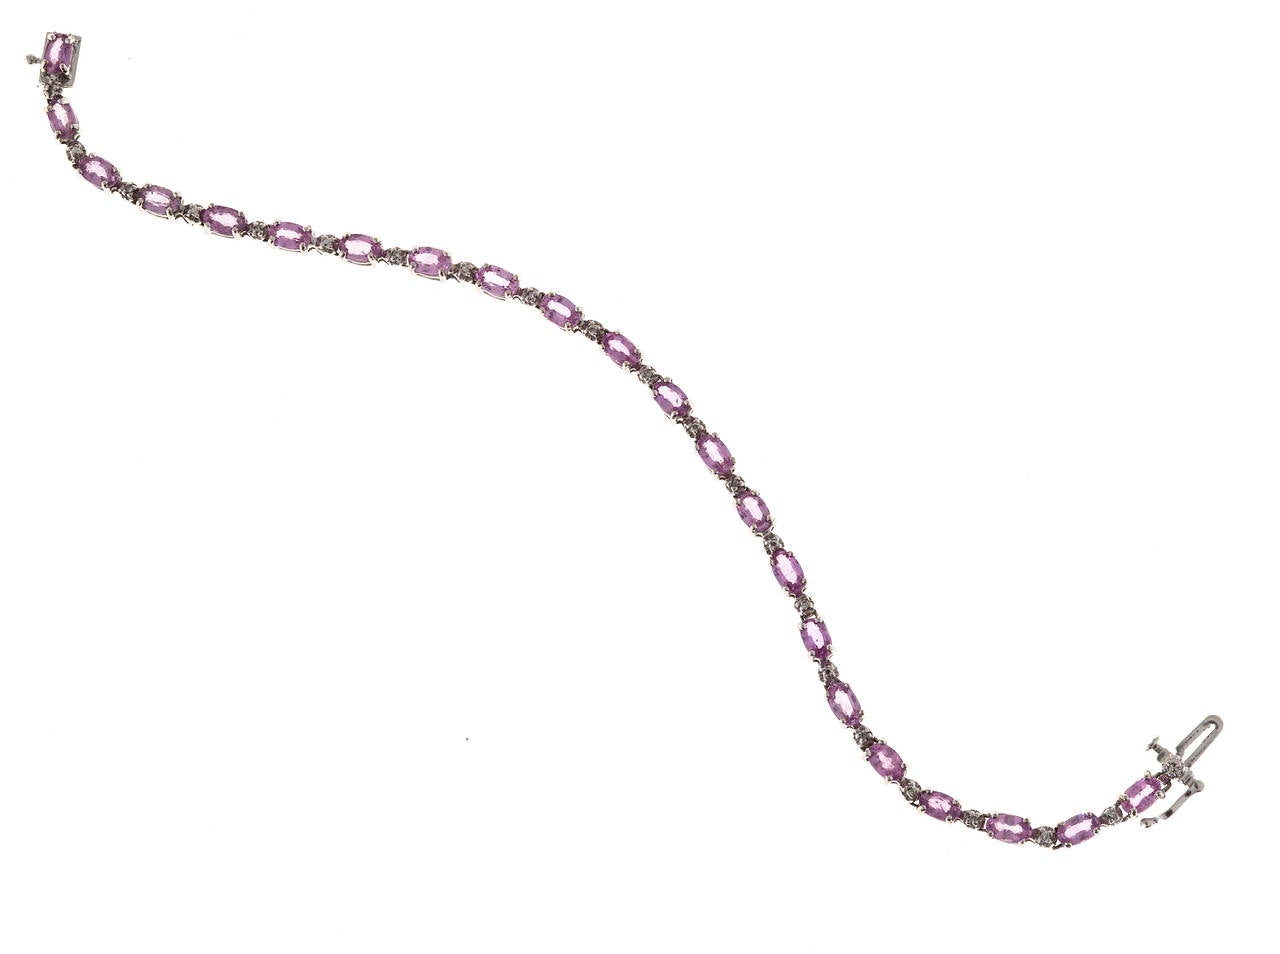 Classic 22 stone oval medium pastel pink Sapphire 7.70ct, 14k white gold bracelet with 10 diamonds. Hinged links. Invisible catch and side safety.

10 round diamonds approx. total weight .05cts, H, SI
22 oval pink Sapphires approx. total weight